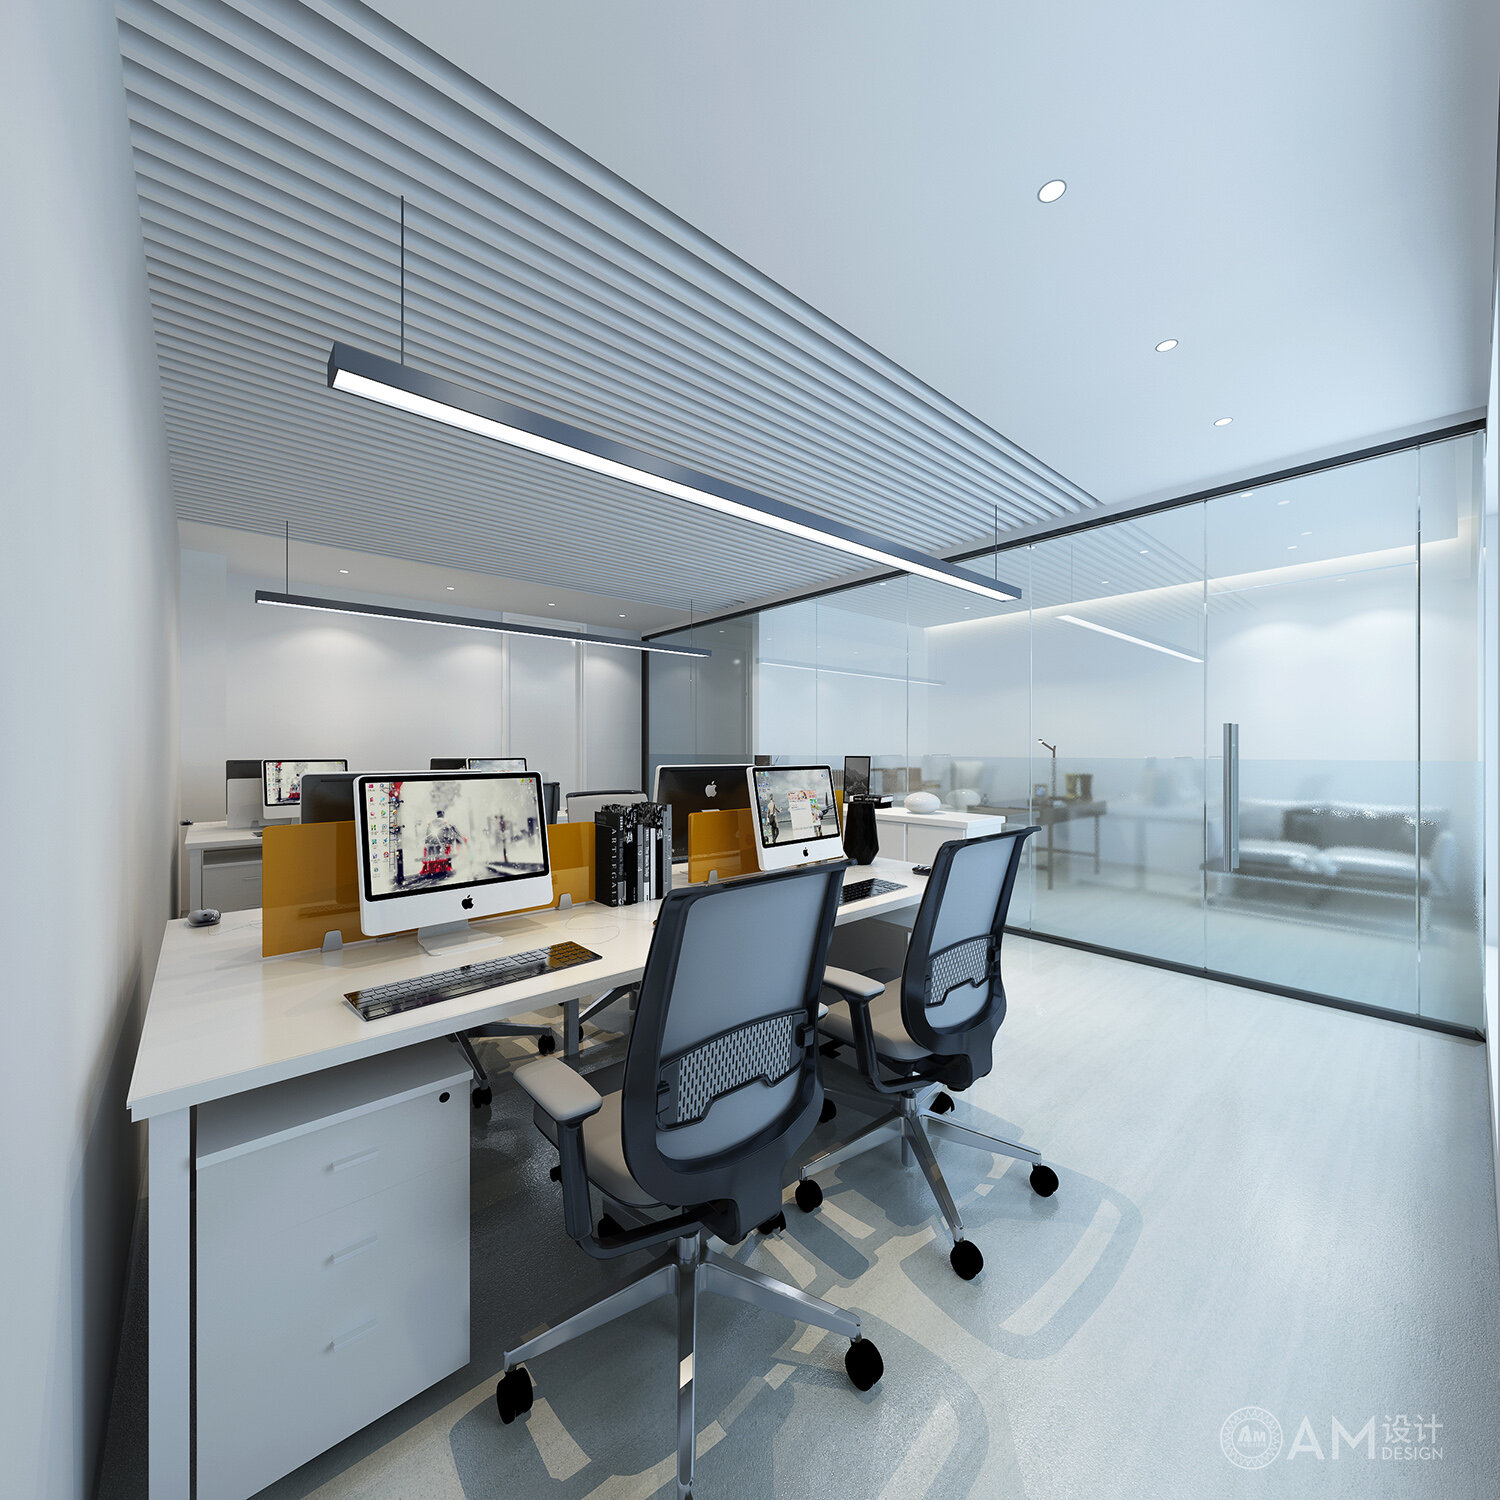 AM DESIGN | Office design of Thermal Office Building in Tongzhou New City, Beijing